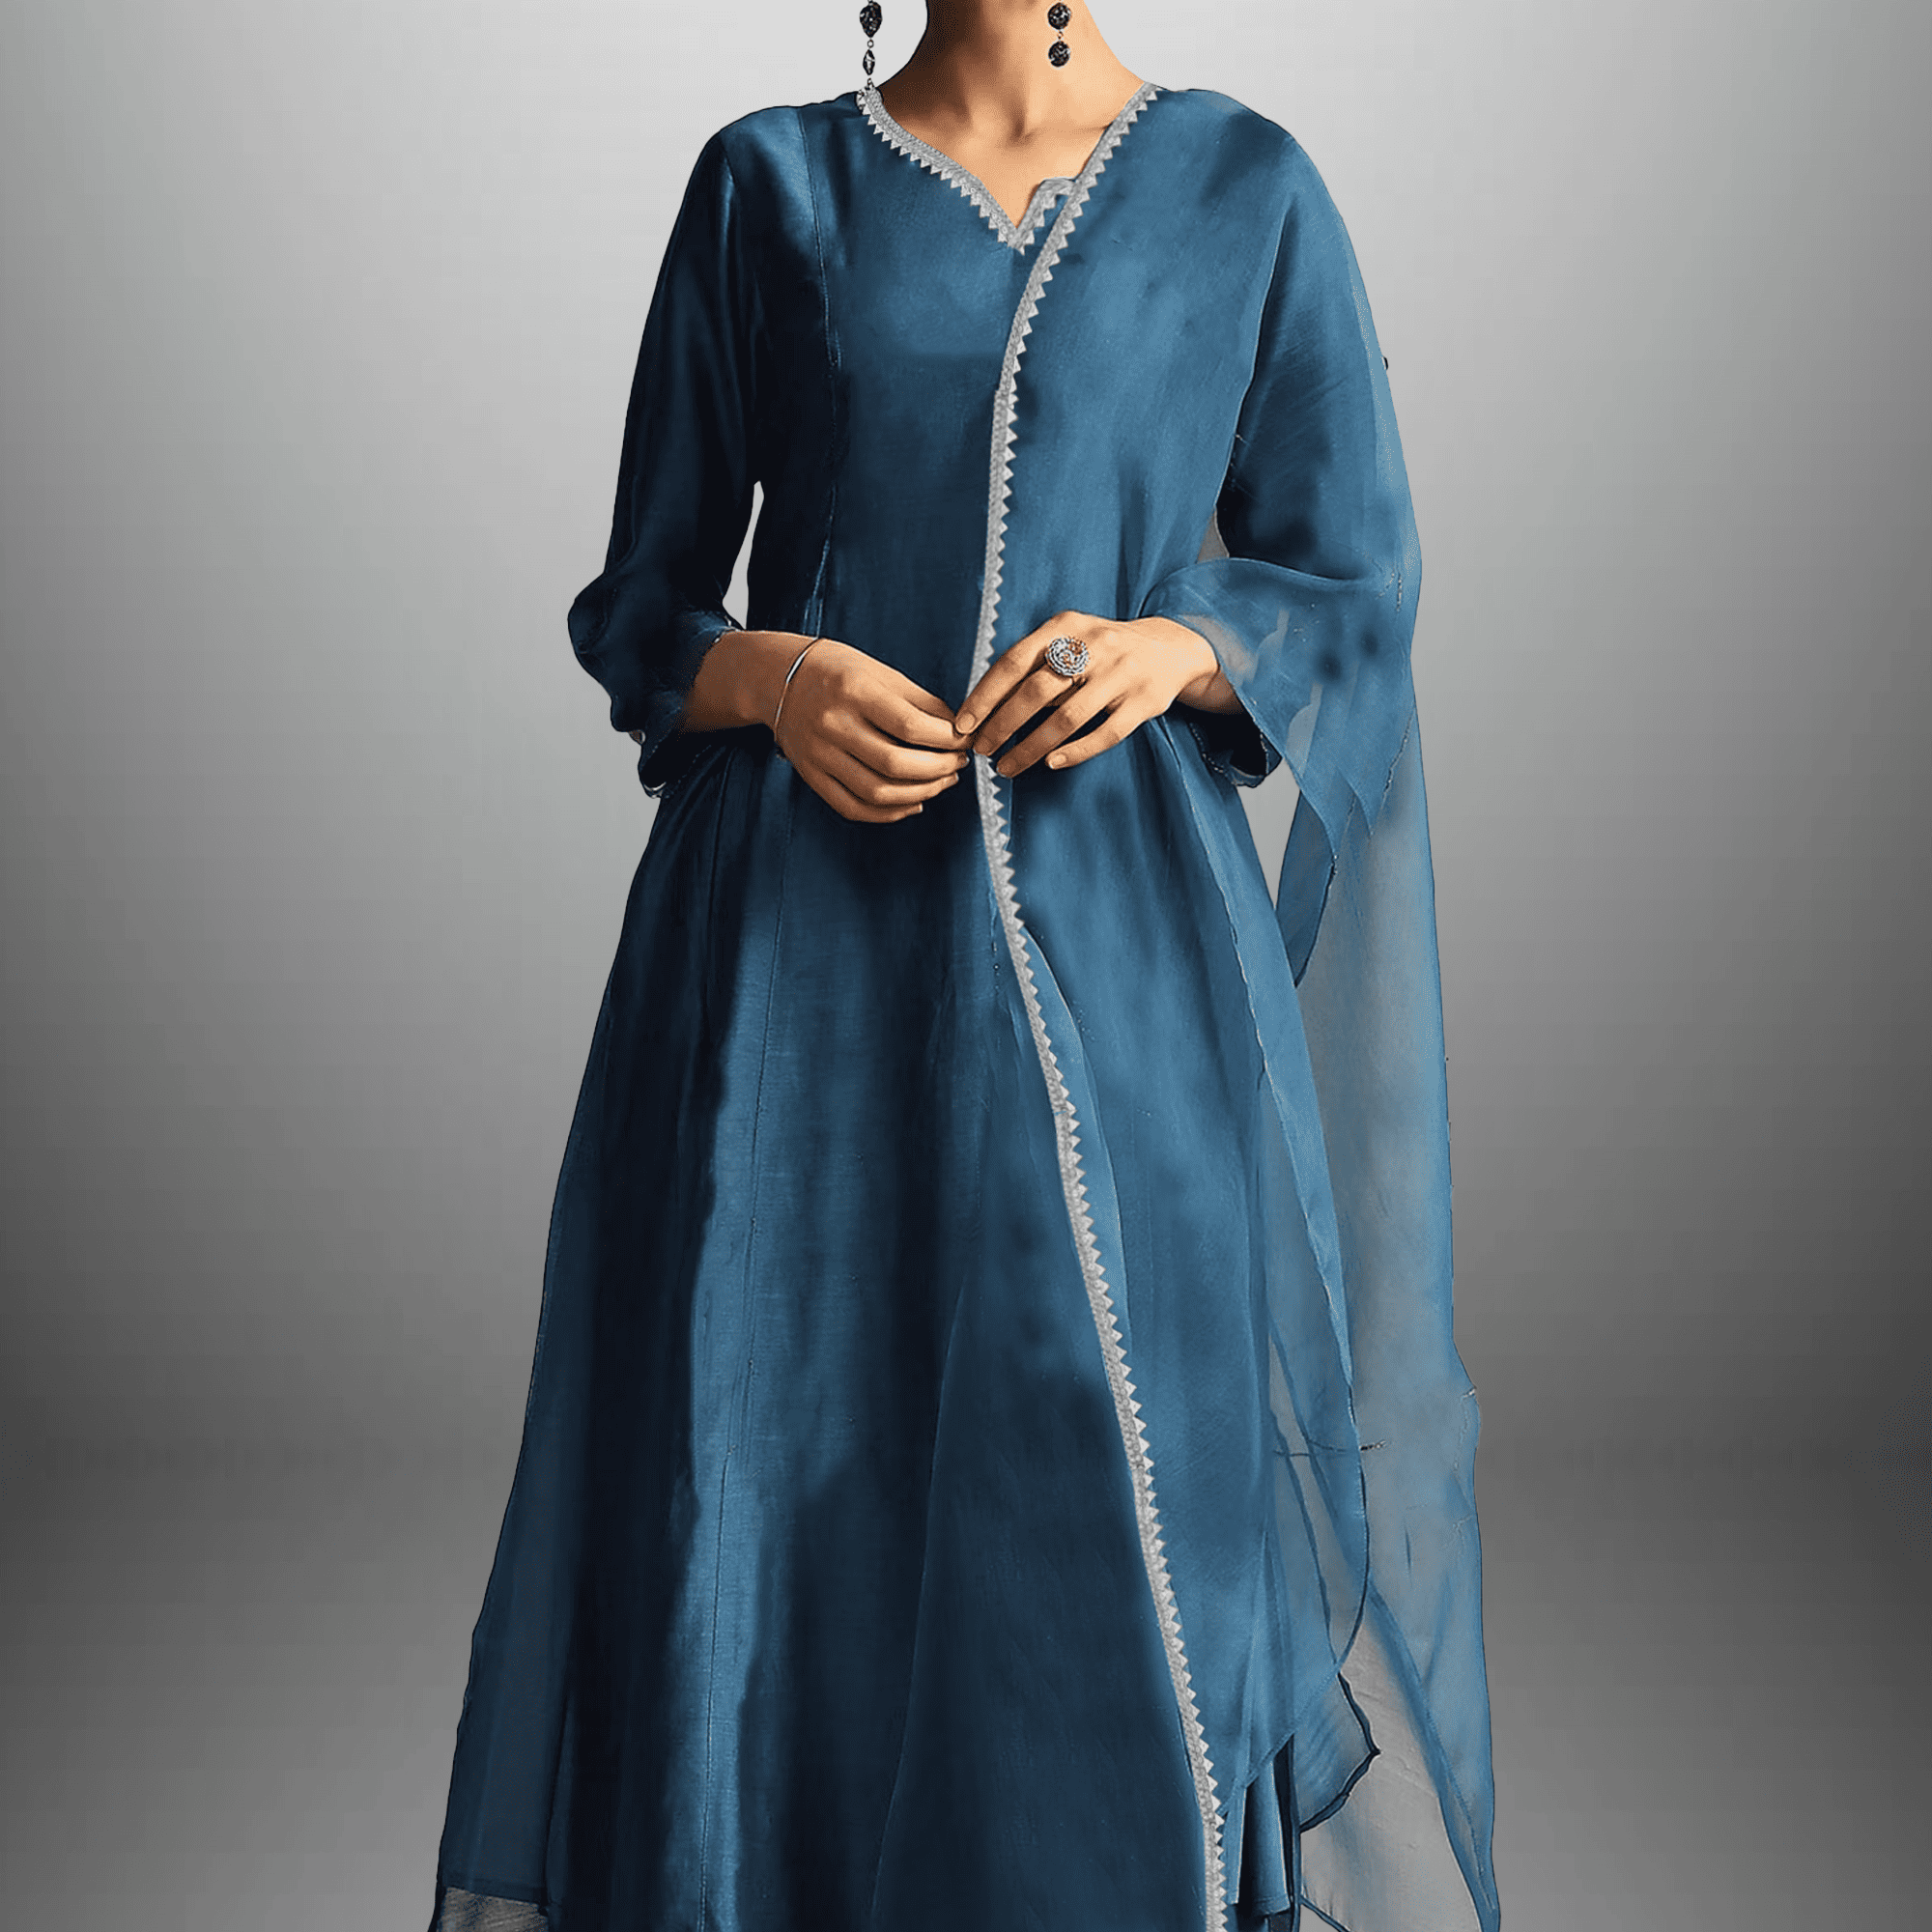 Women's Organza Blue Kurti with lace border with a Pant and Dupatta-RWKS074